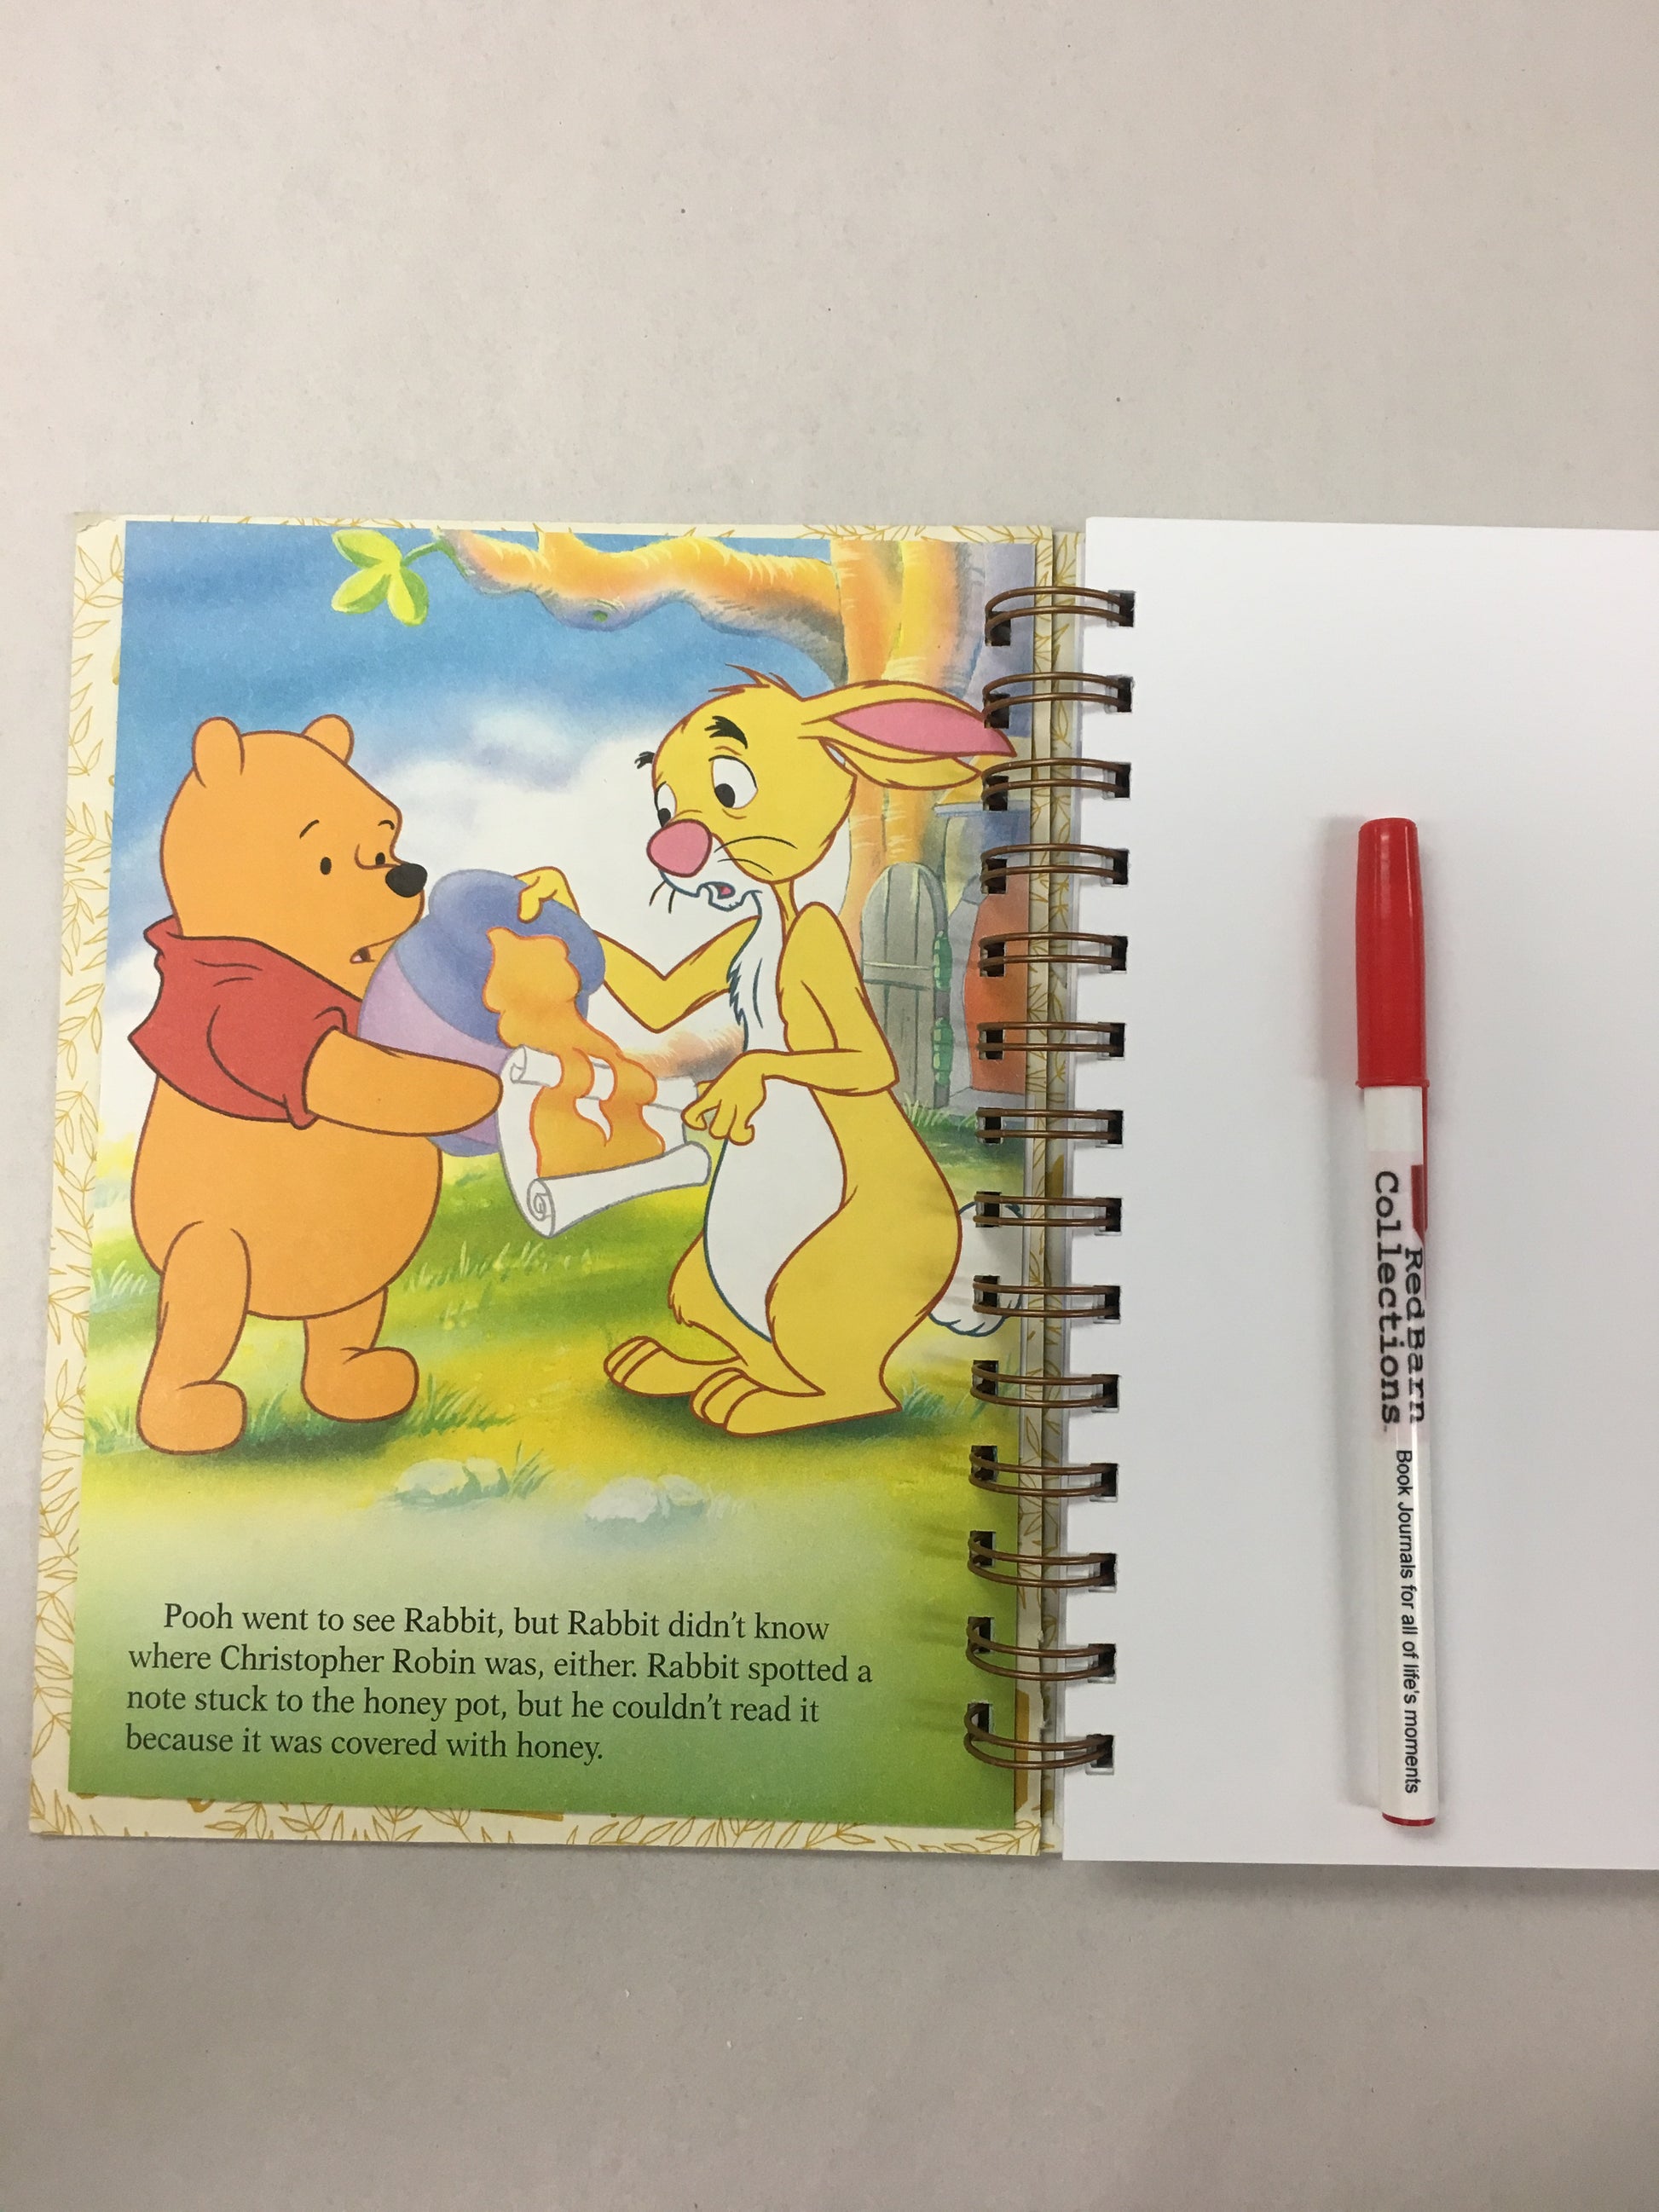 Pooh's Grand Adventure-Red Barn Collections